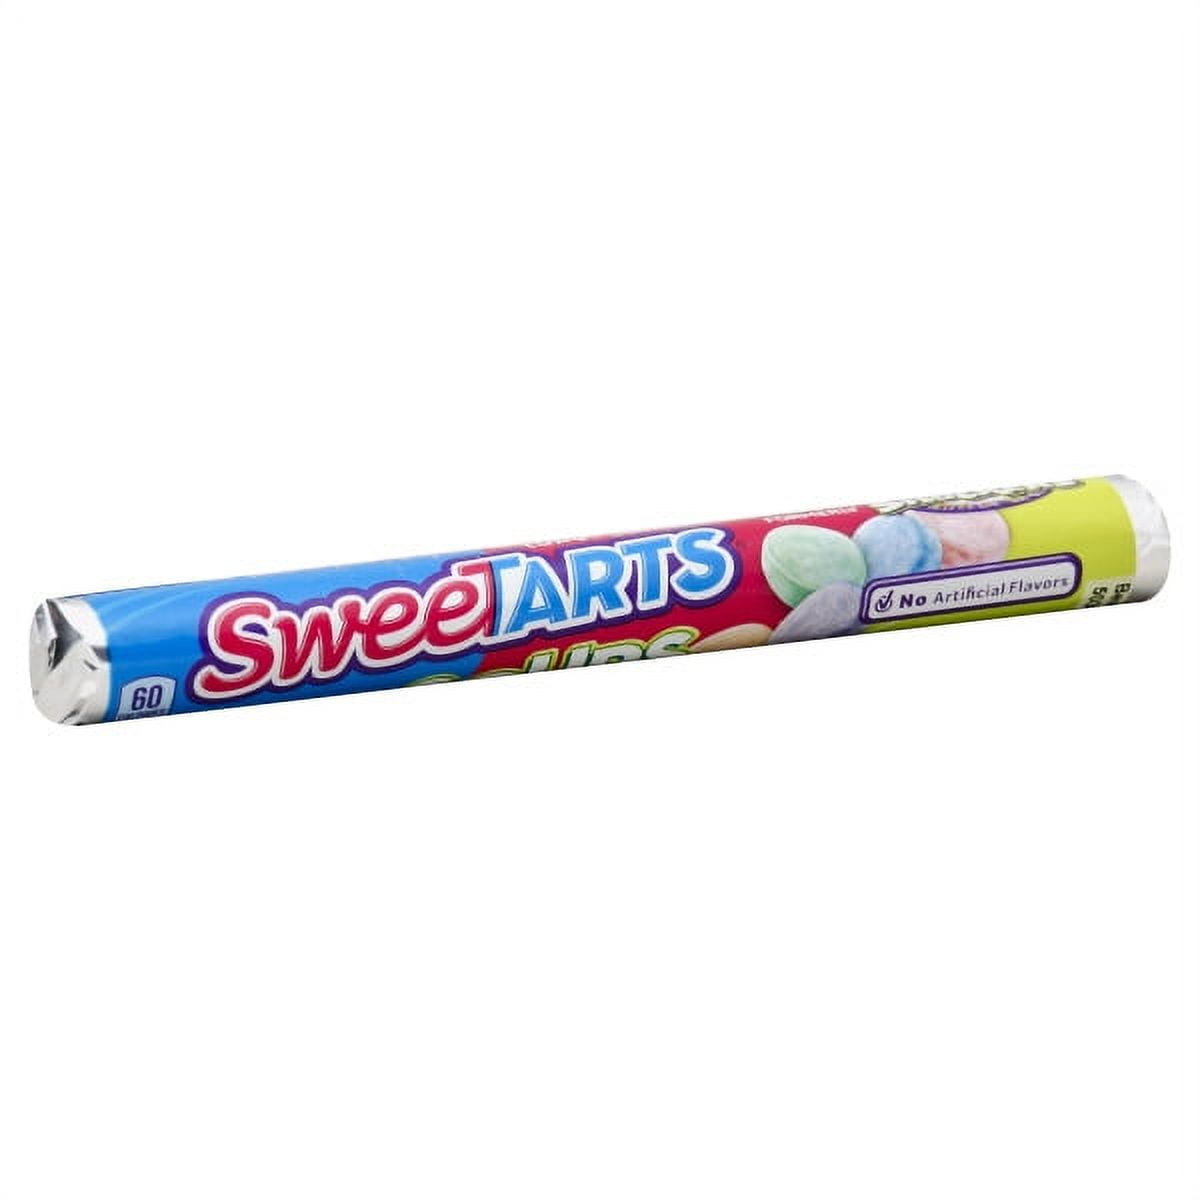 Sweetarts Extreme Sour Chewy Candy 1.65 Oz. Wrapper, Non Chocolate Candy